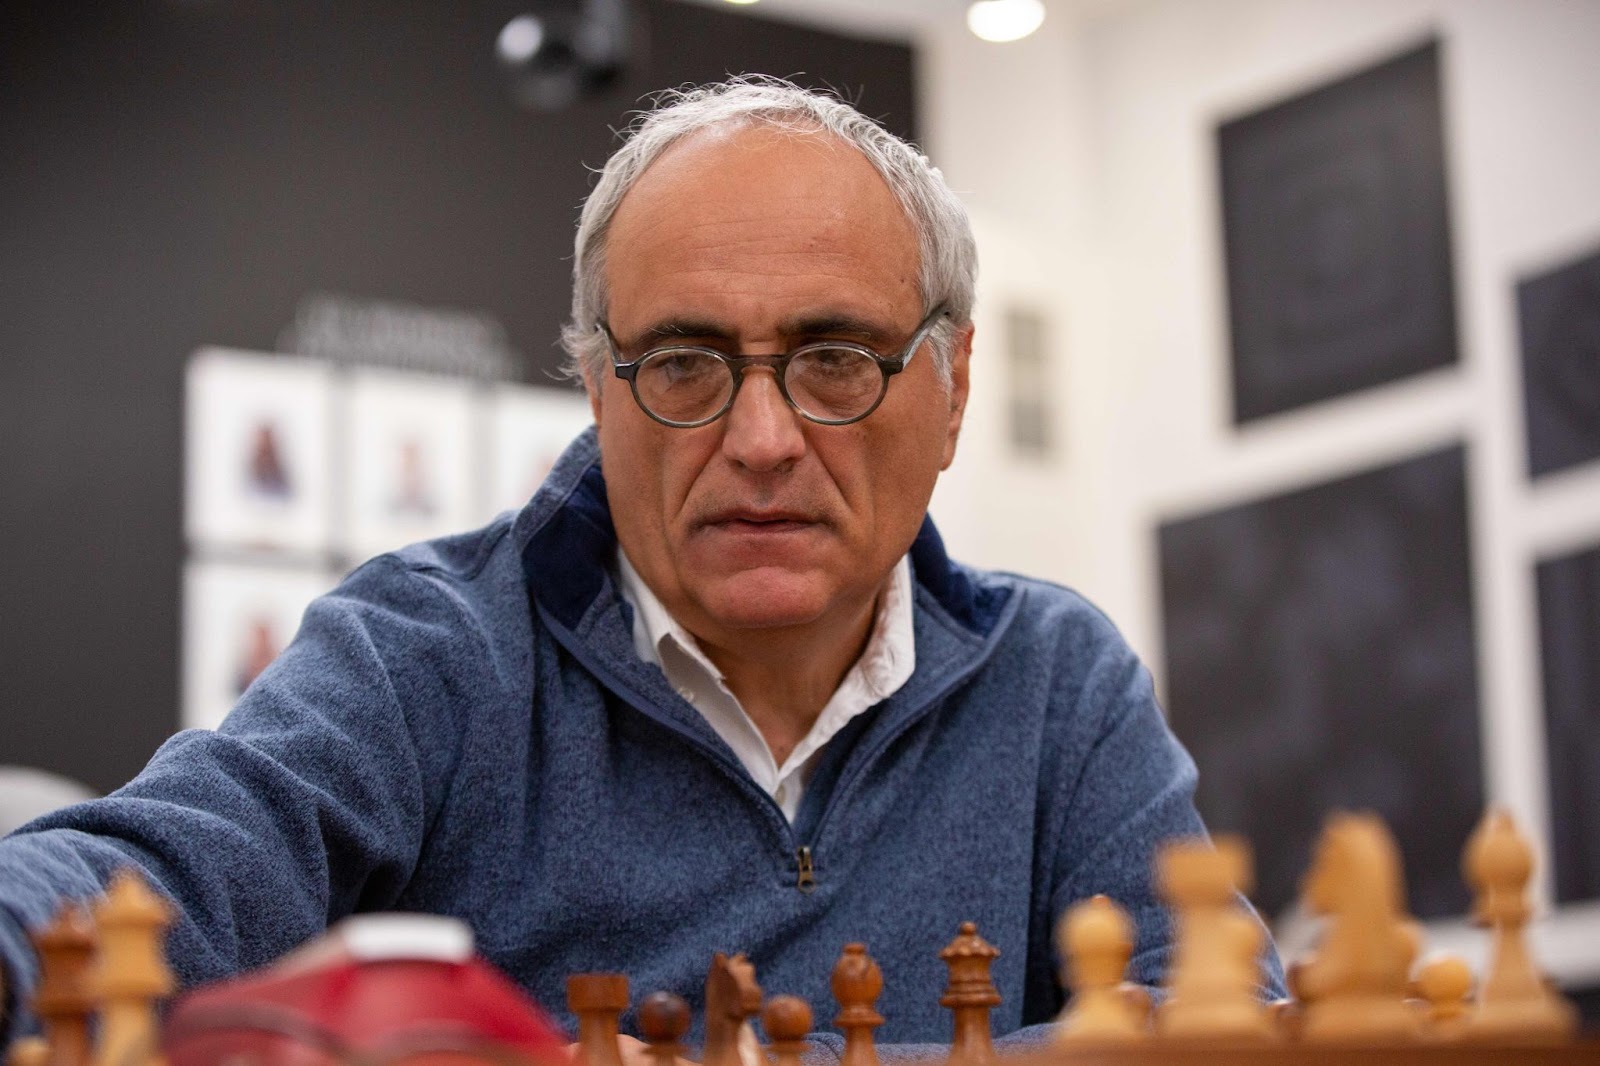 The Best Chess Games of Pedro Espinosa 